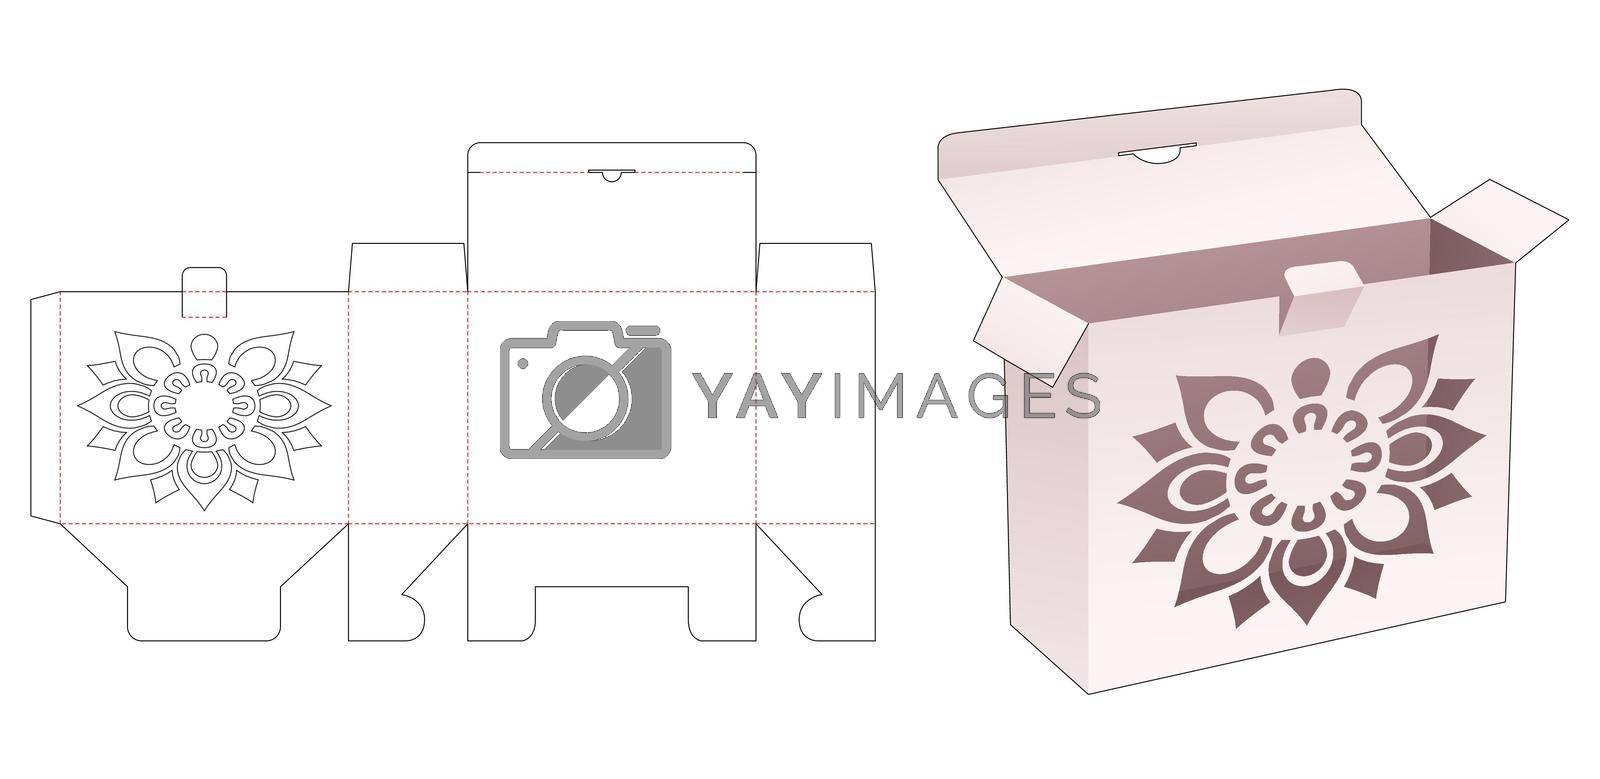 Royalty free image of Packaging box with mandala stencil and locked point die cut template by valueinvestor